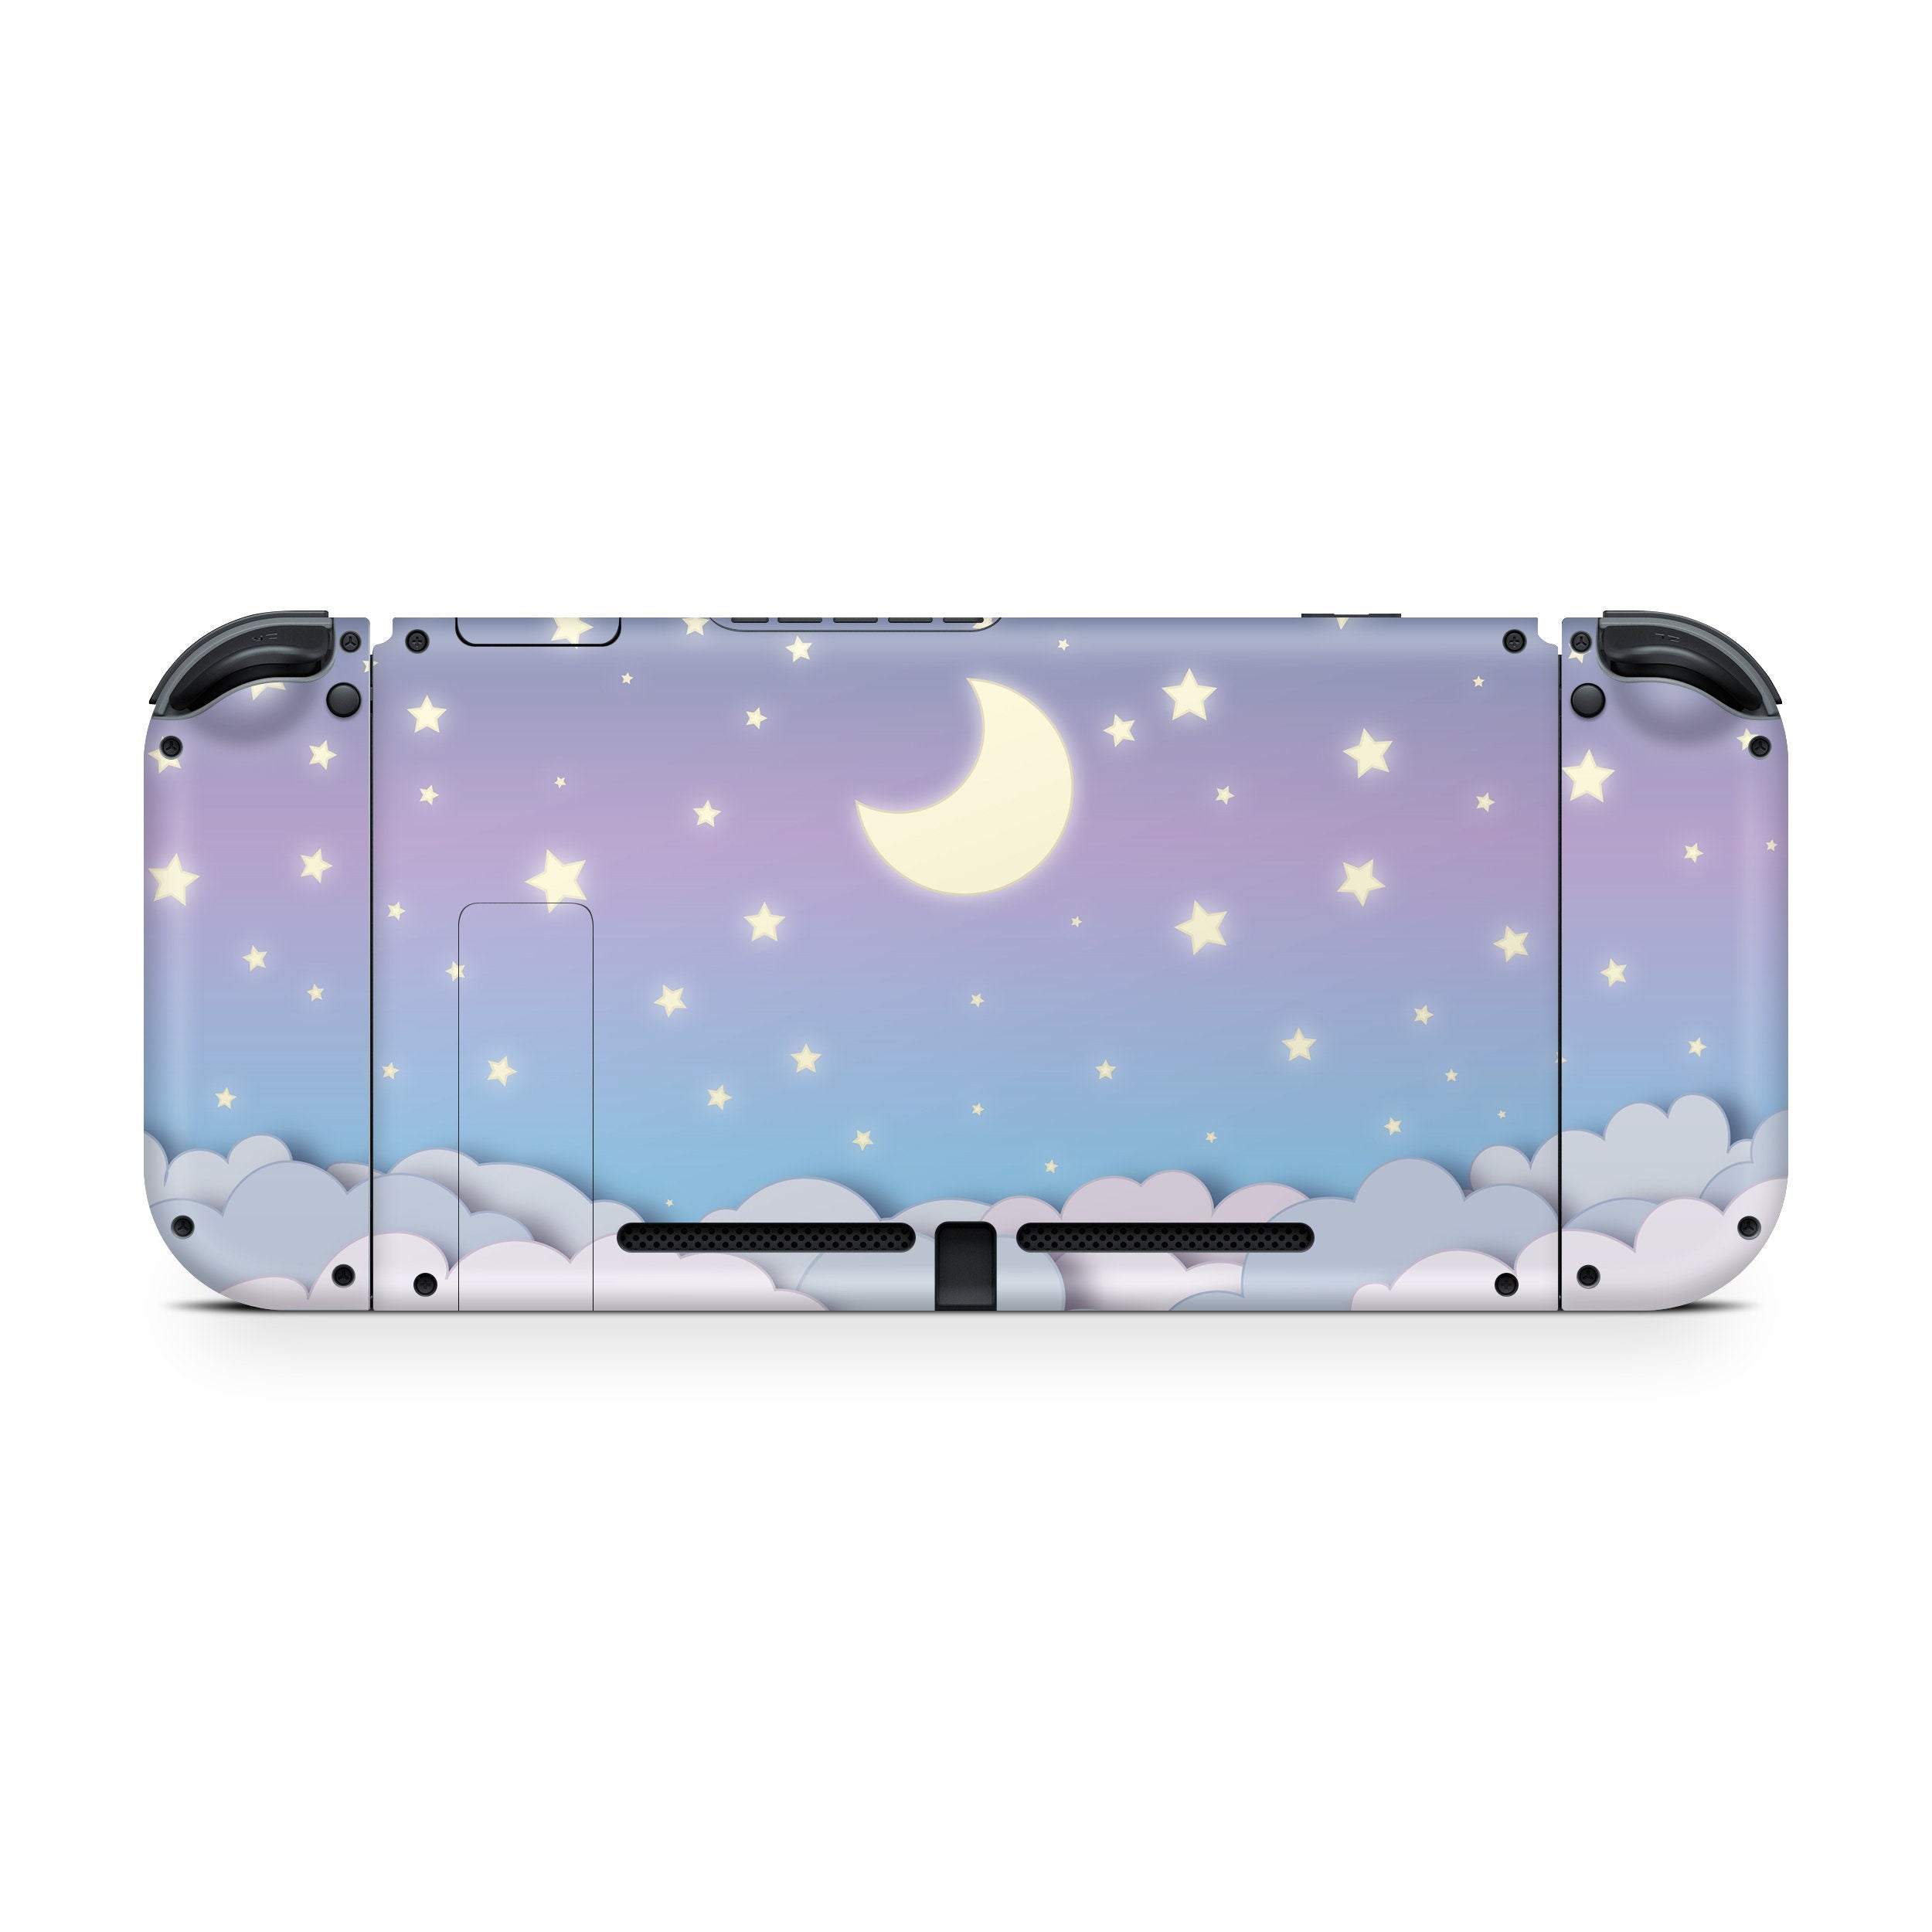 nintendo switches skin purple Clouds, Pastel Starry blue Sky switch skin moon Full wrap 3m